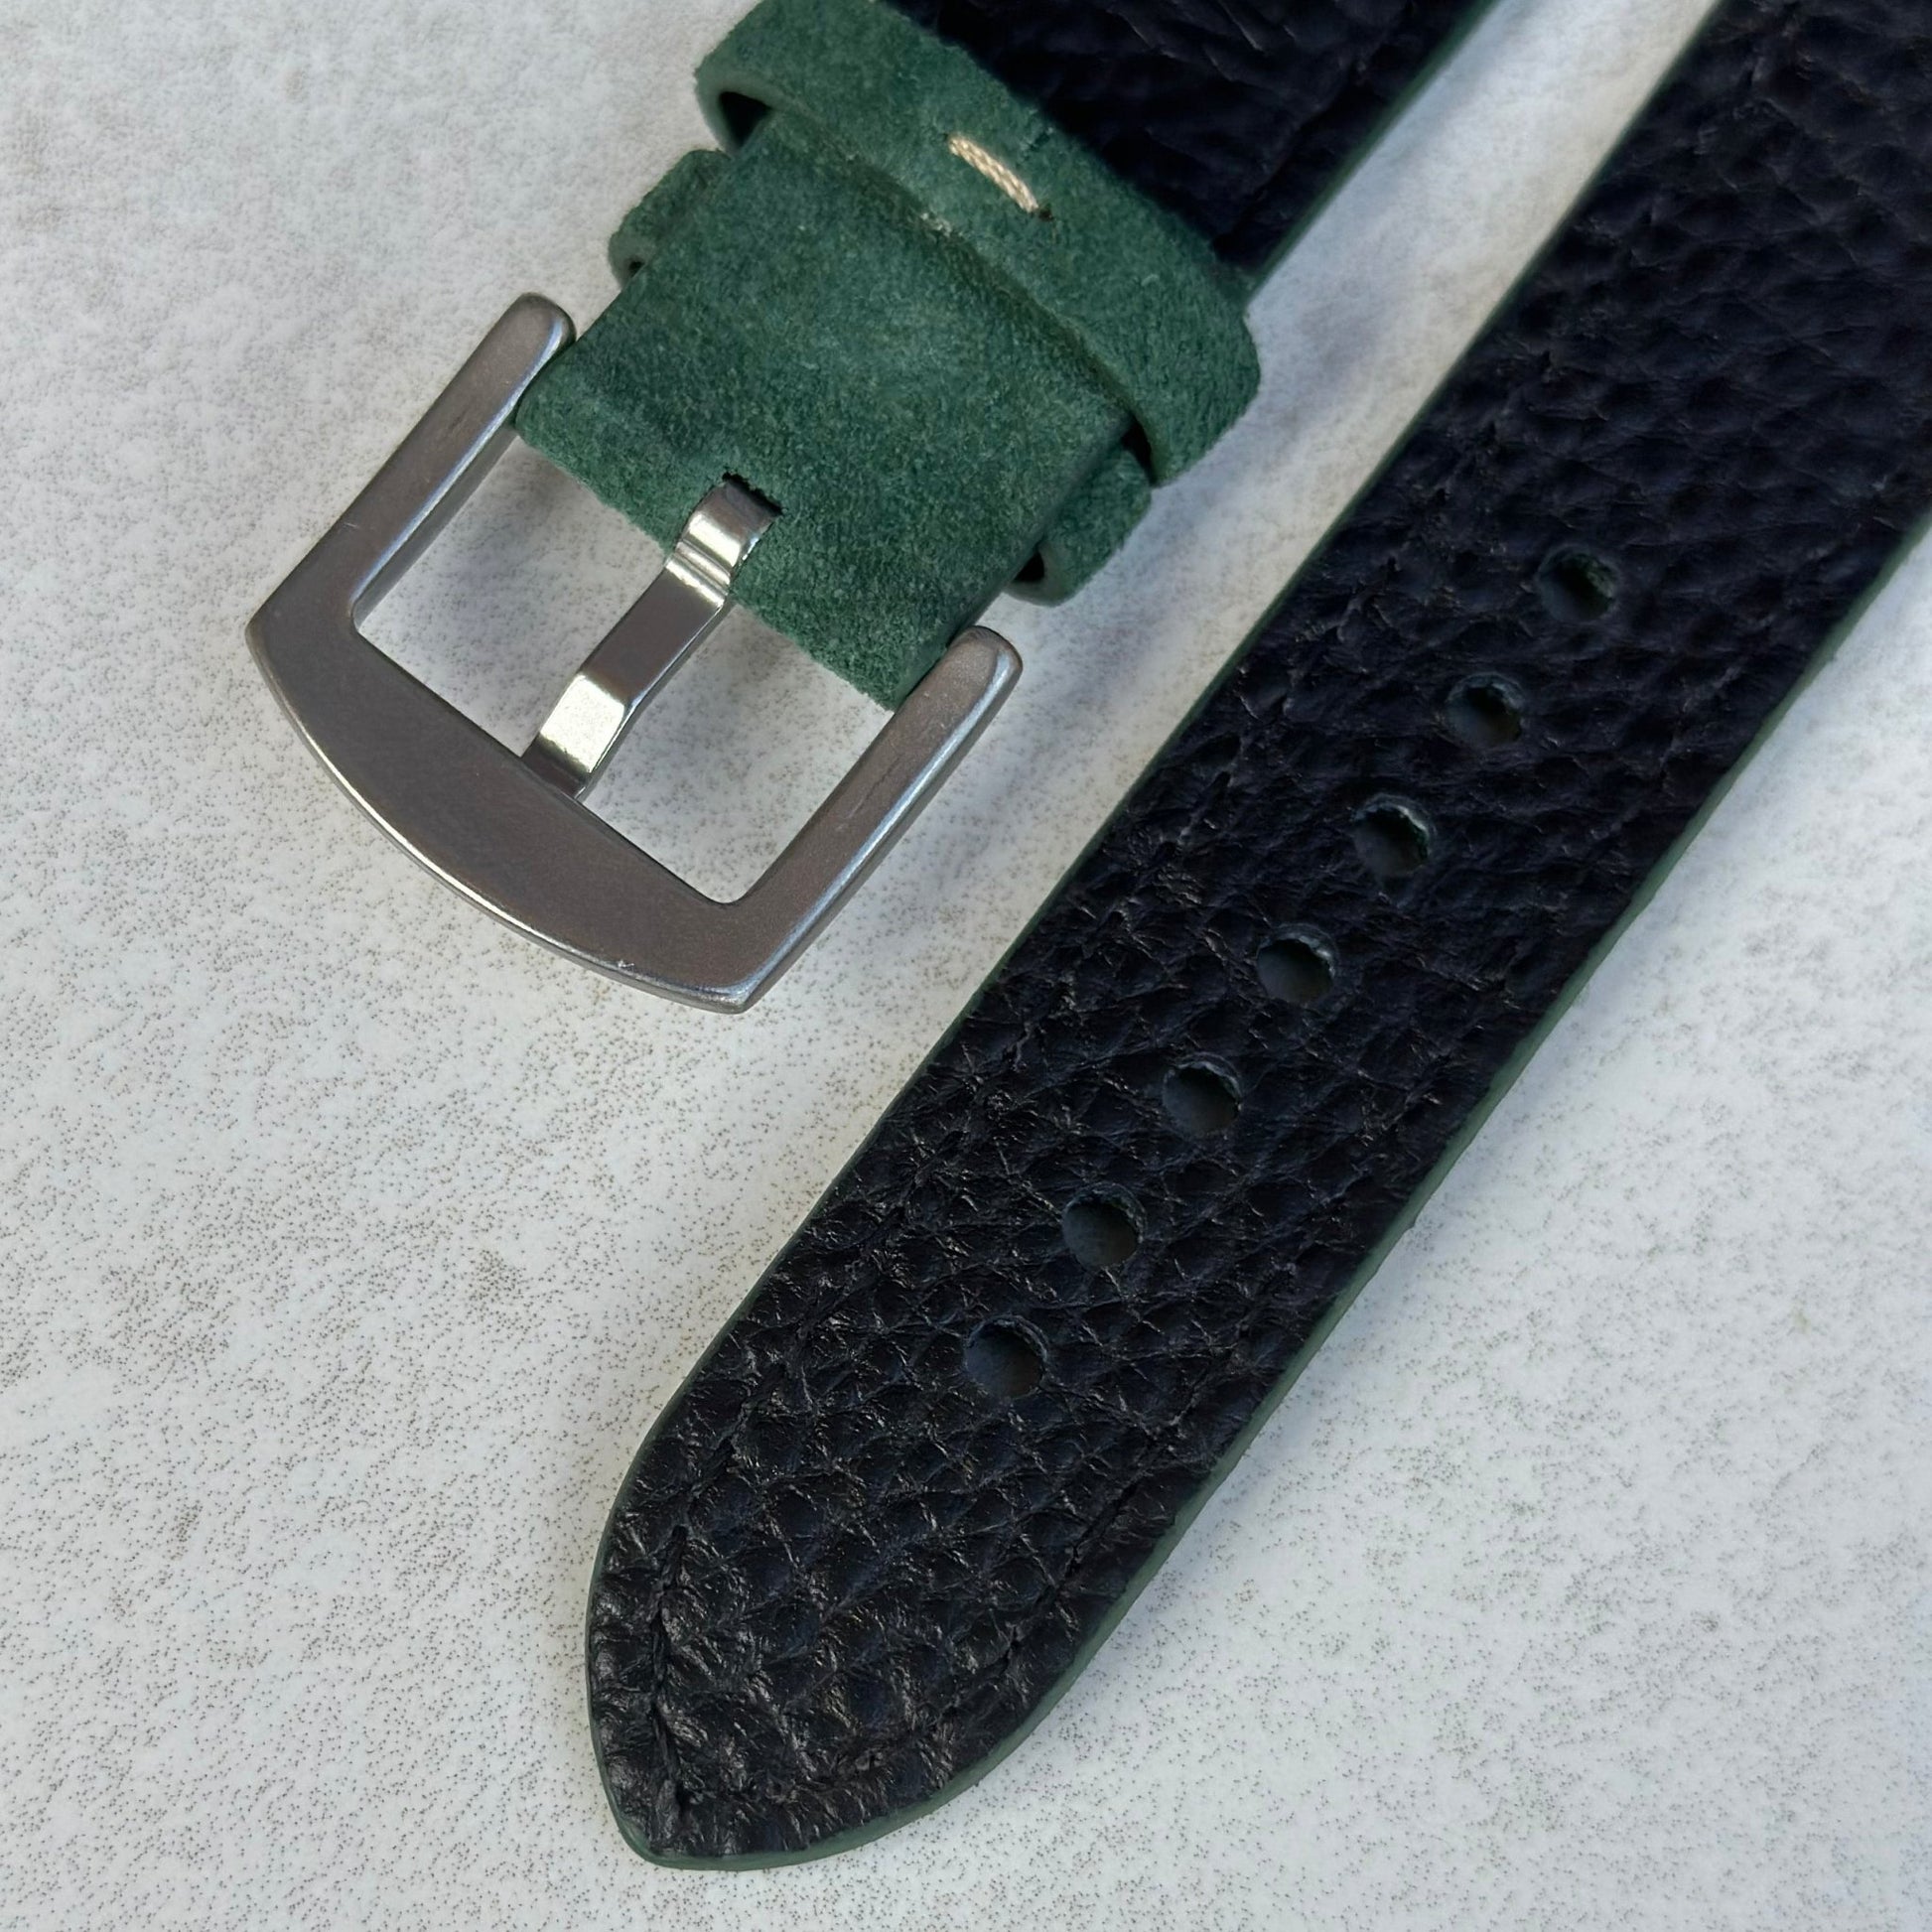 Stainless steel buckle on the hunter green suede Apple Watch strap.